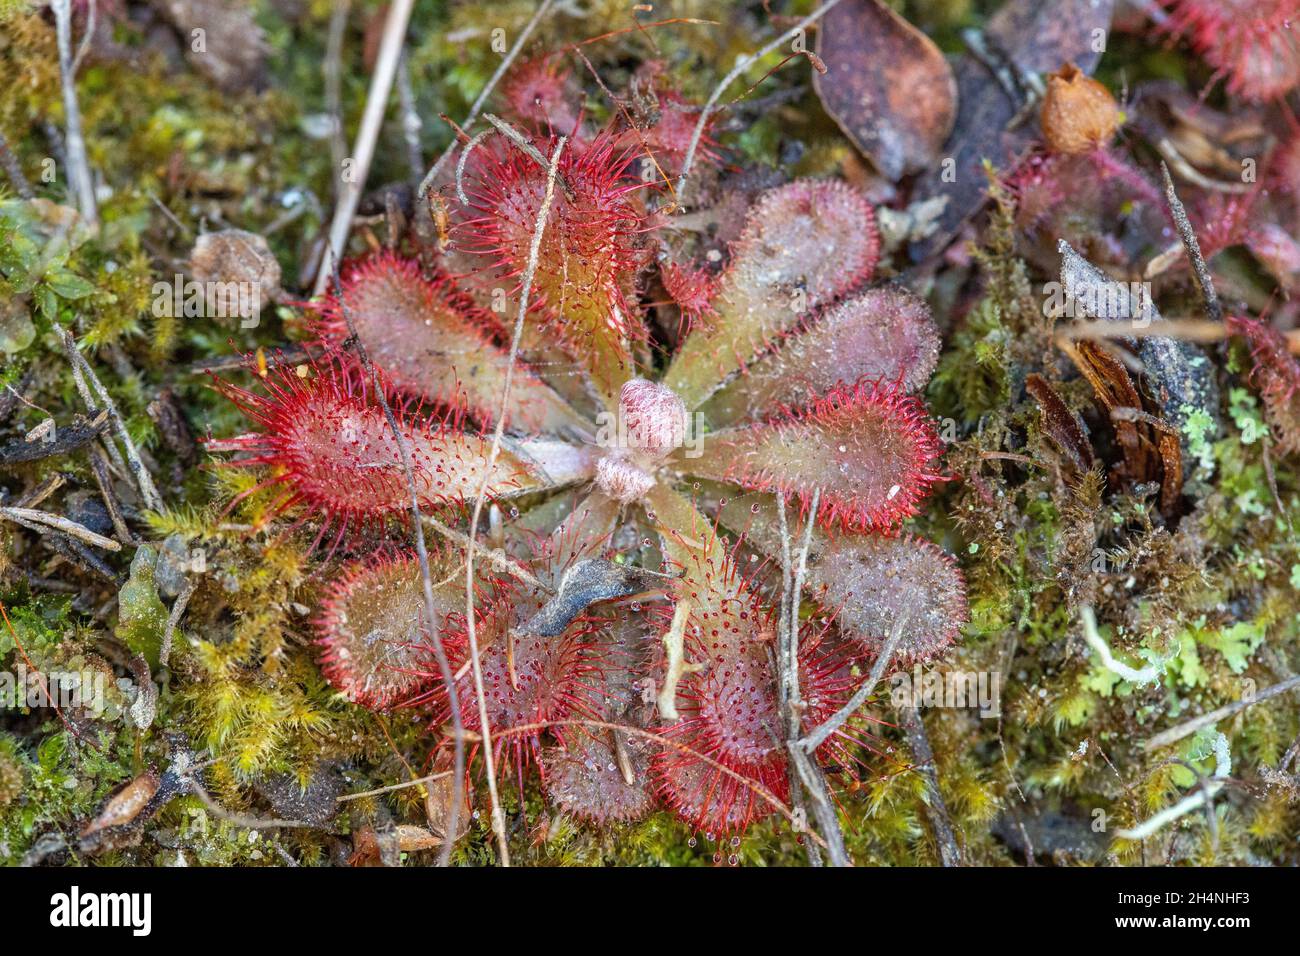 Close-up of of the carnivorous plant Drosera sp. found in nature close to George in the Western Cape of South Africa Stock Photo